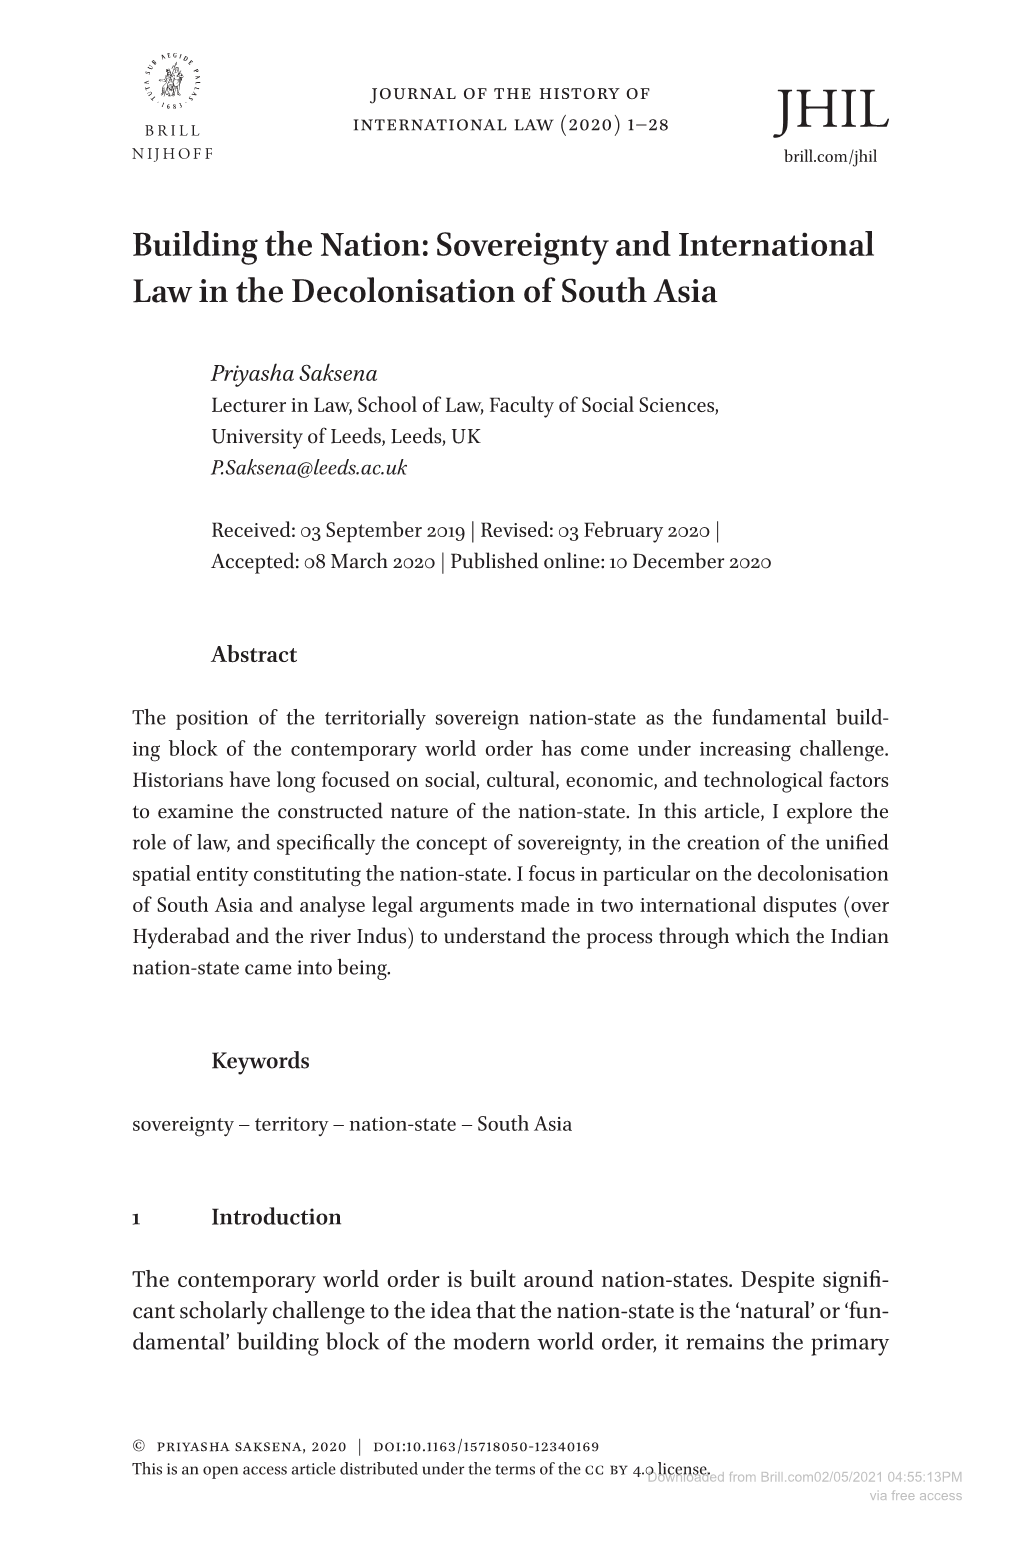 Sovereignty and International Law in the Decolonisation of South Asia